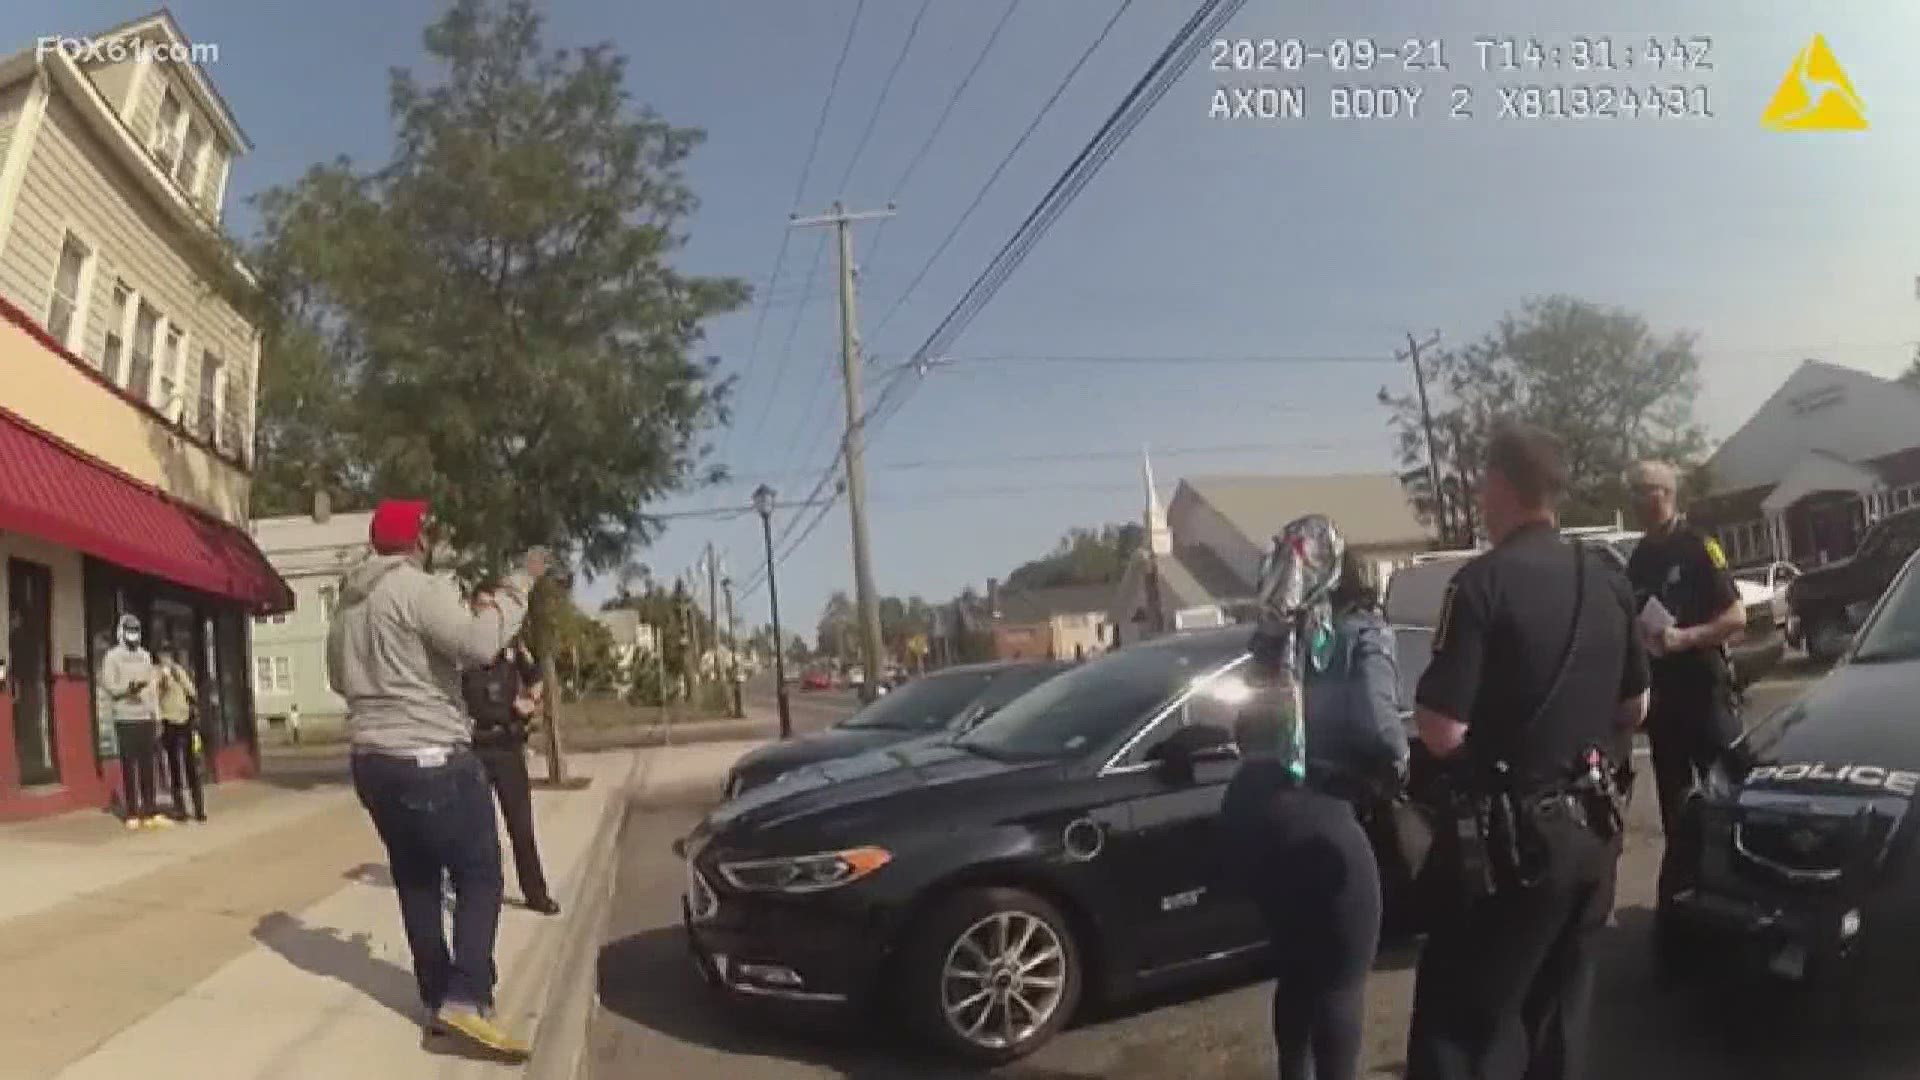 Videos have been circulating on social media showing Hartford police arresting a woman after they claimed her car was stolen.